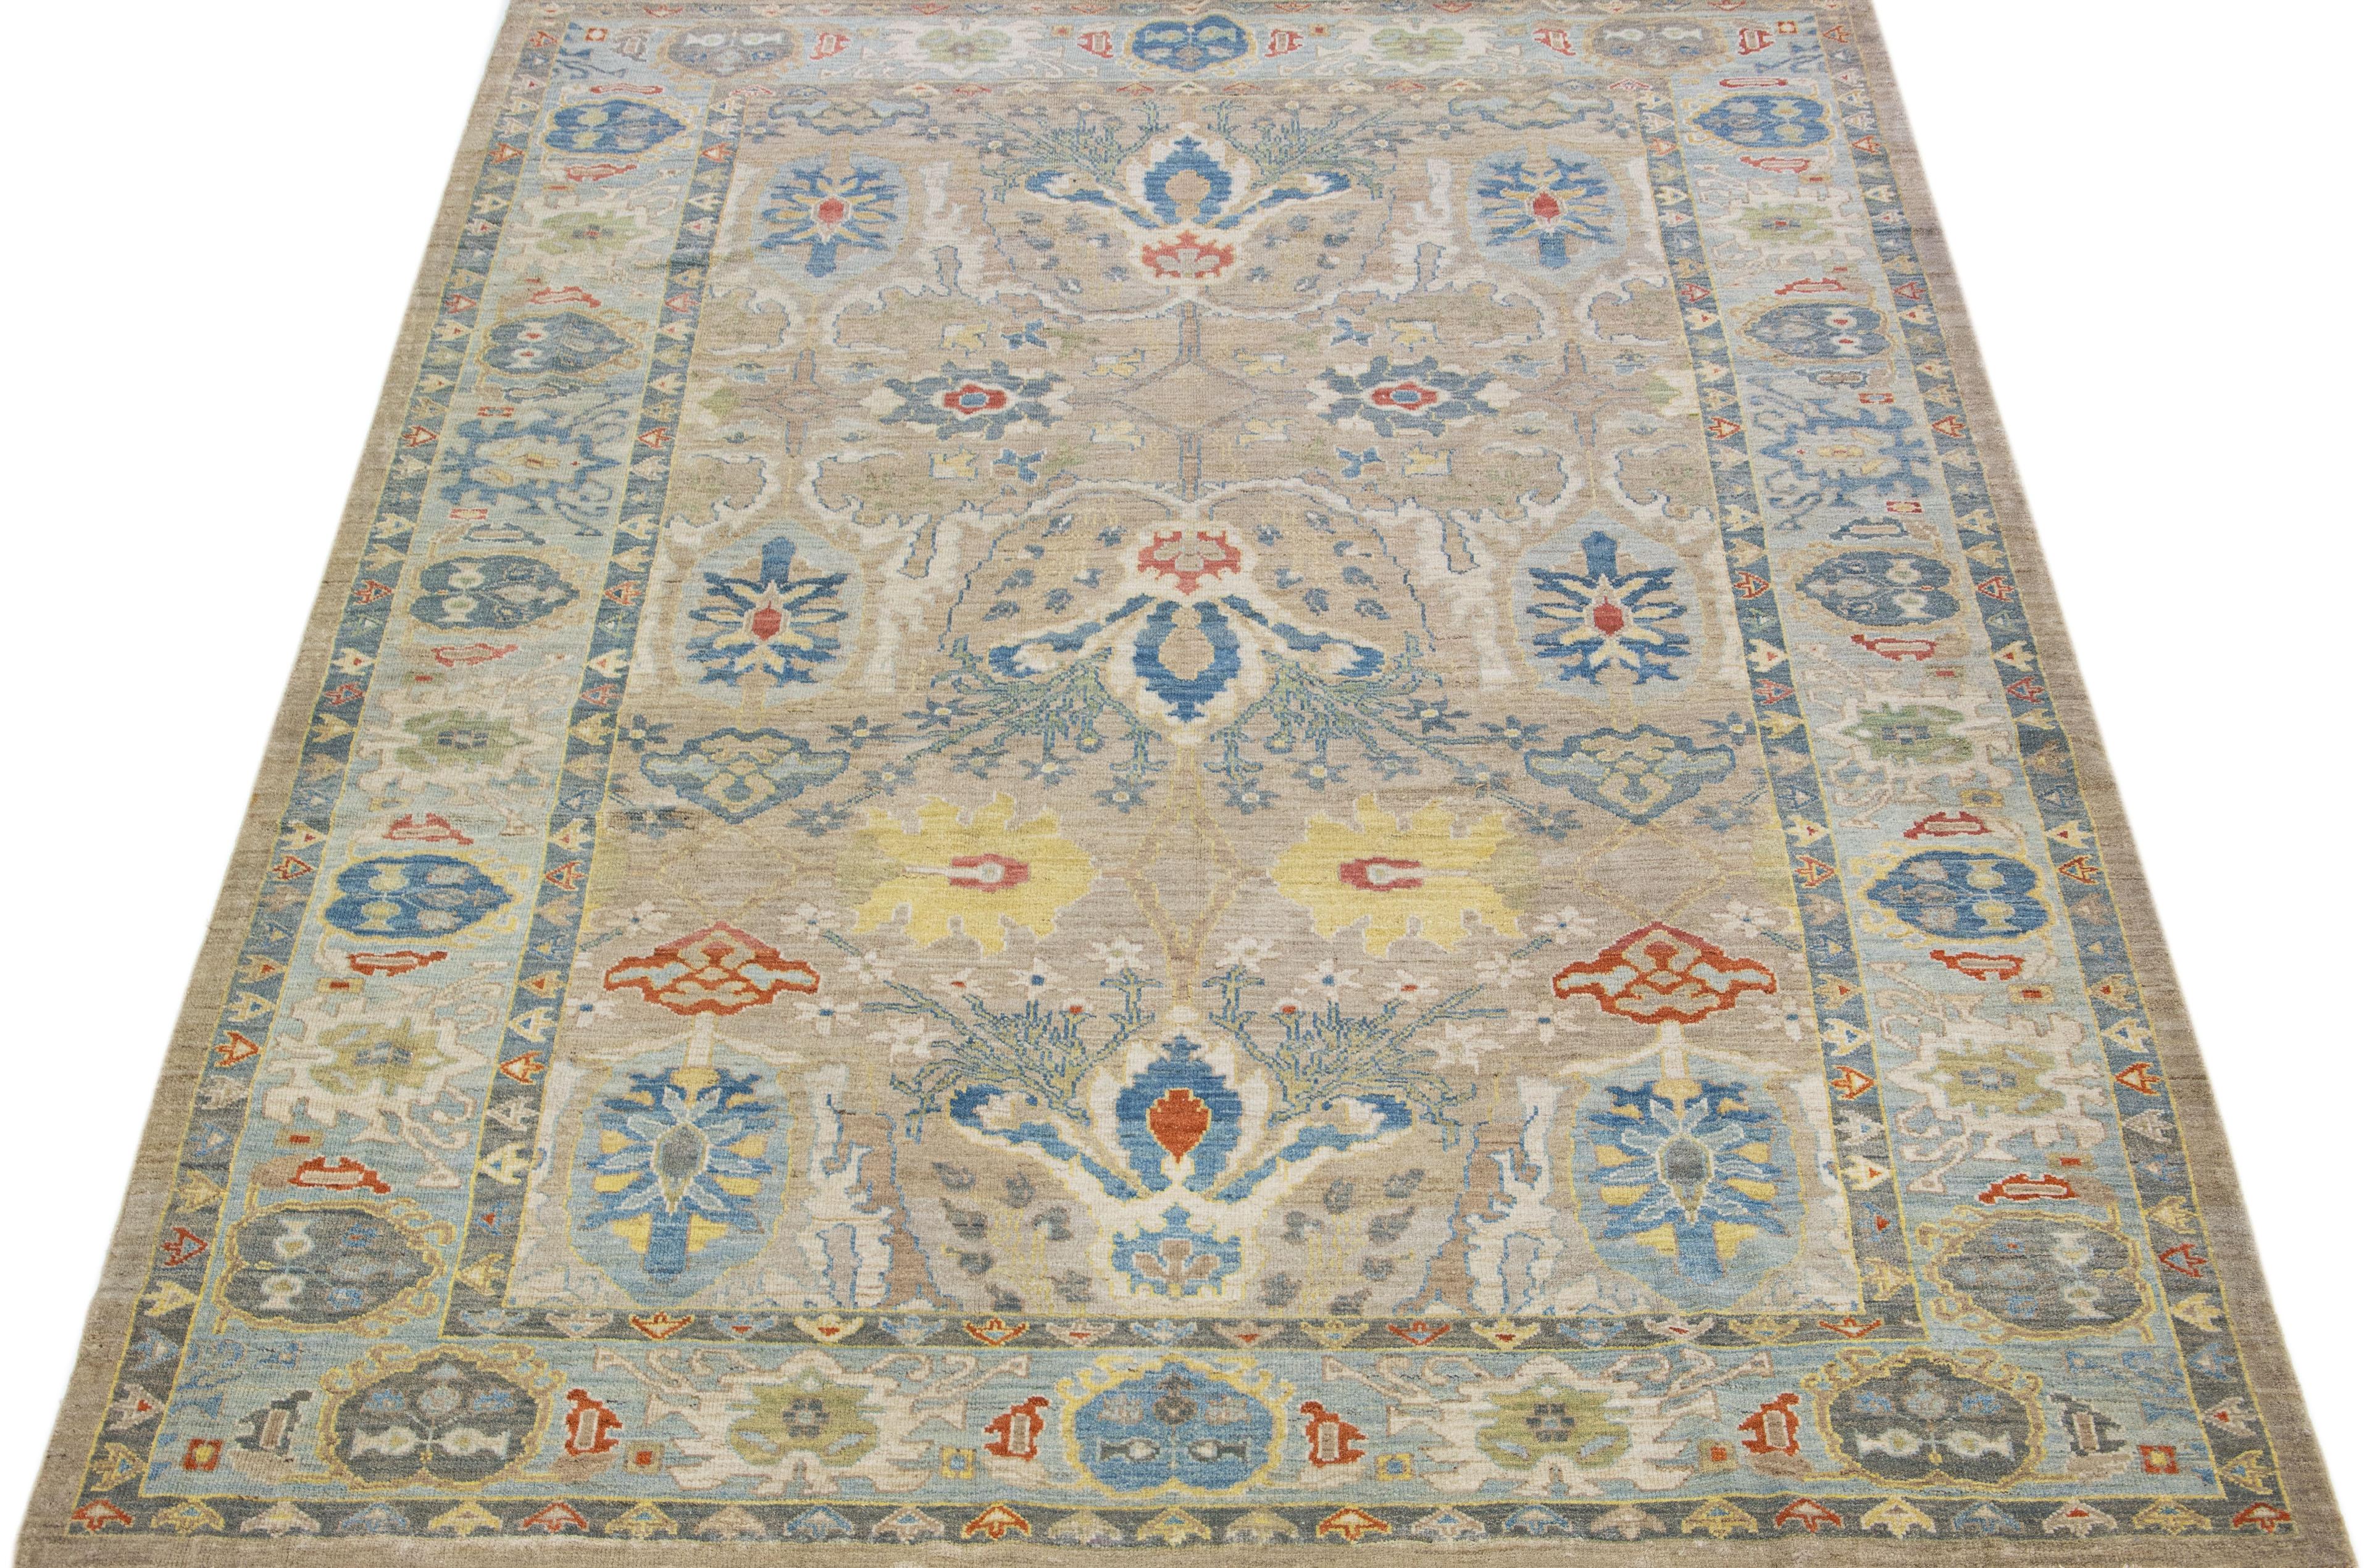 Beautiful modern Sultanabad hand-knotted wool rug with a tan color field. This rug has a blue-designed frame with multicolor accents in a gorgeous all-over floral design.

This rug measures: 8'7